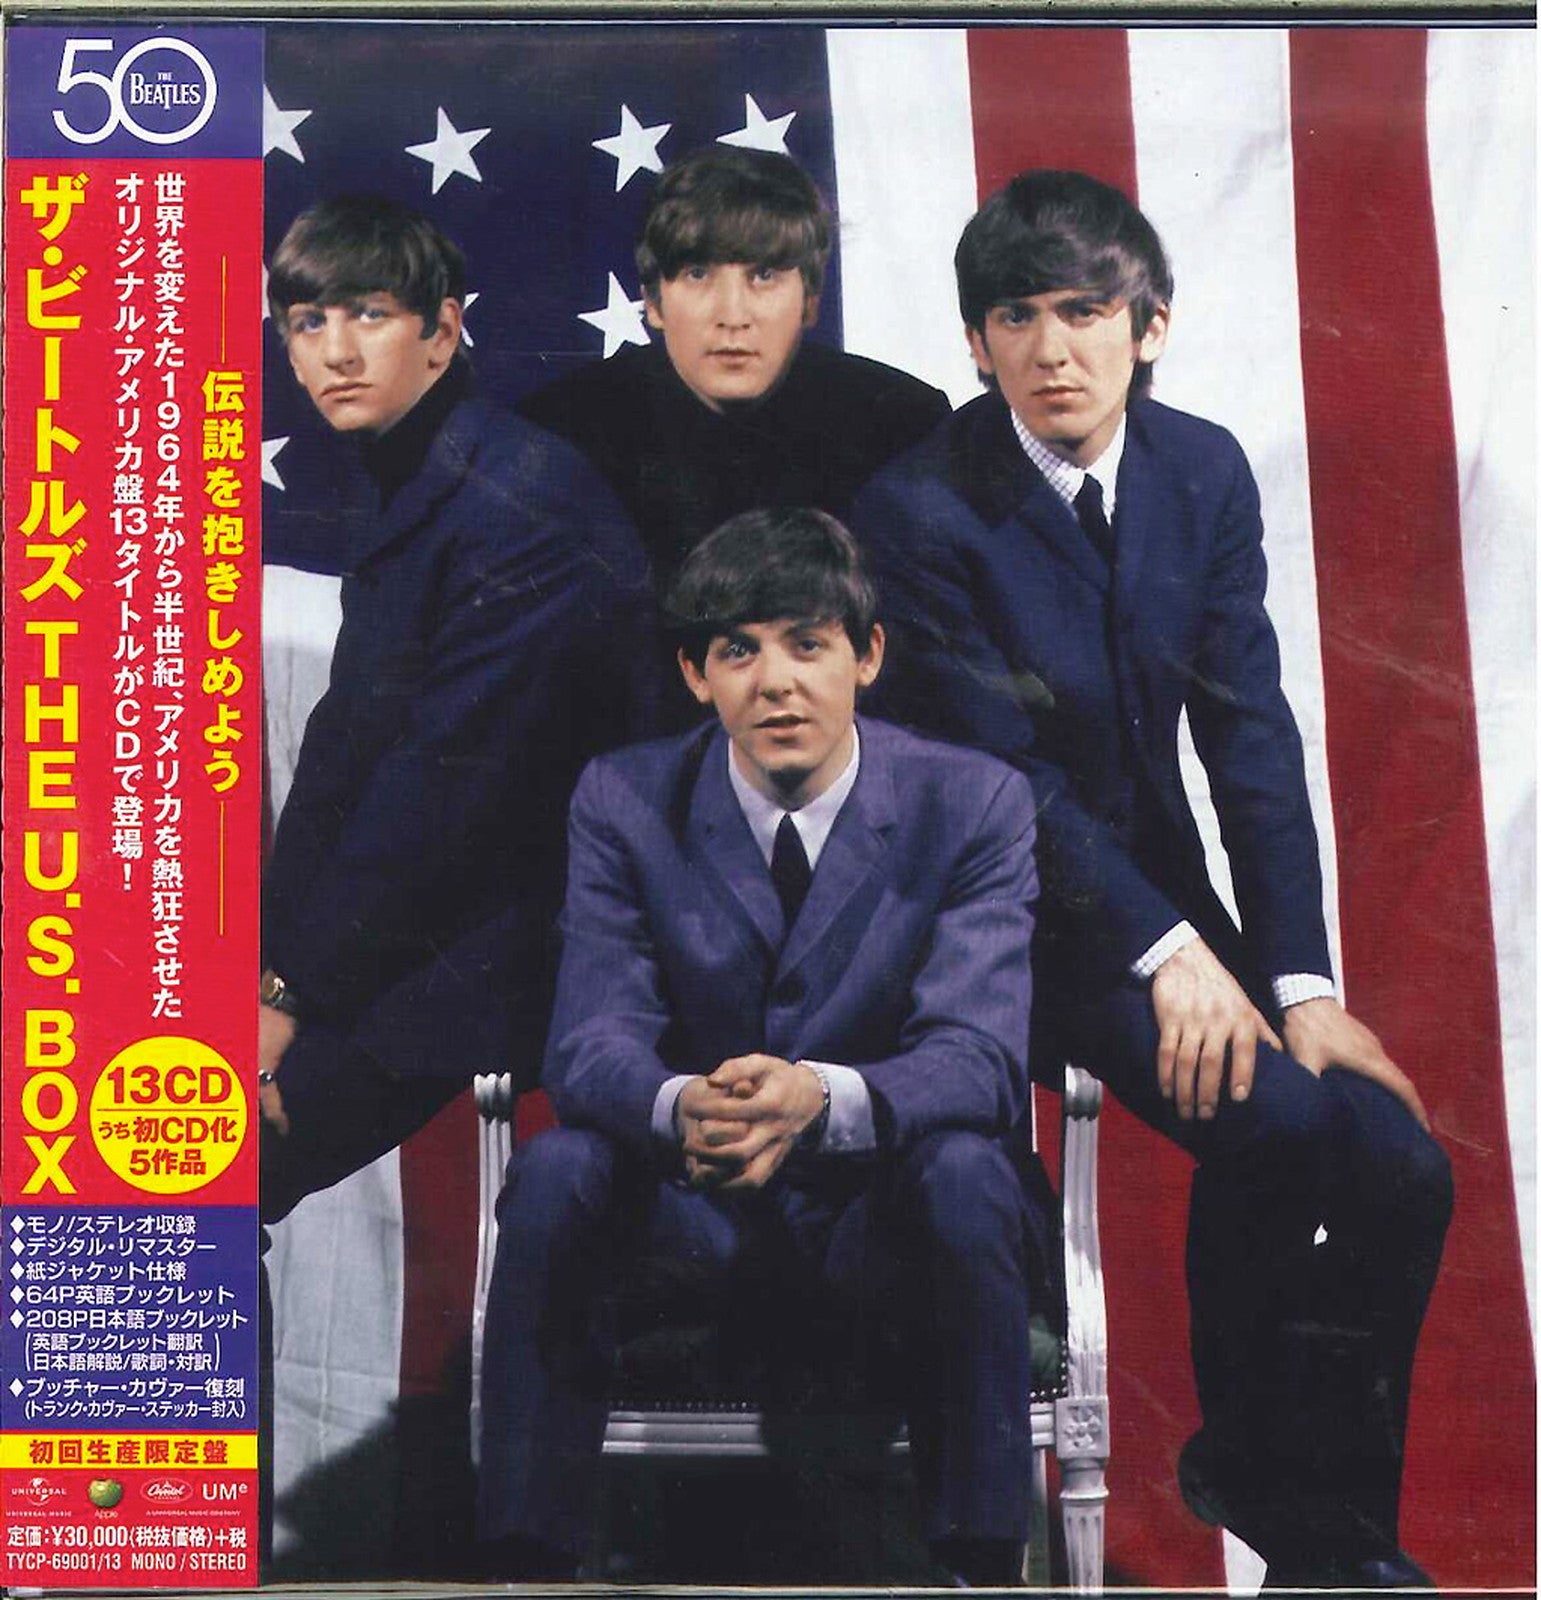 The Beatles - The Us Box - Japan 13 Mini LP CD+Book Limited